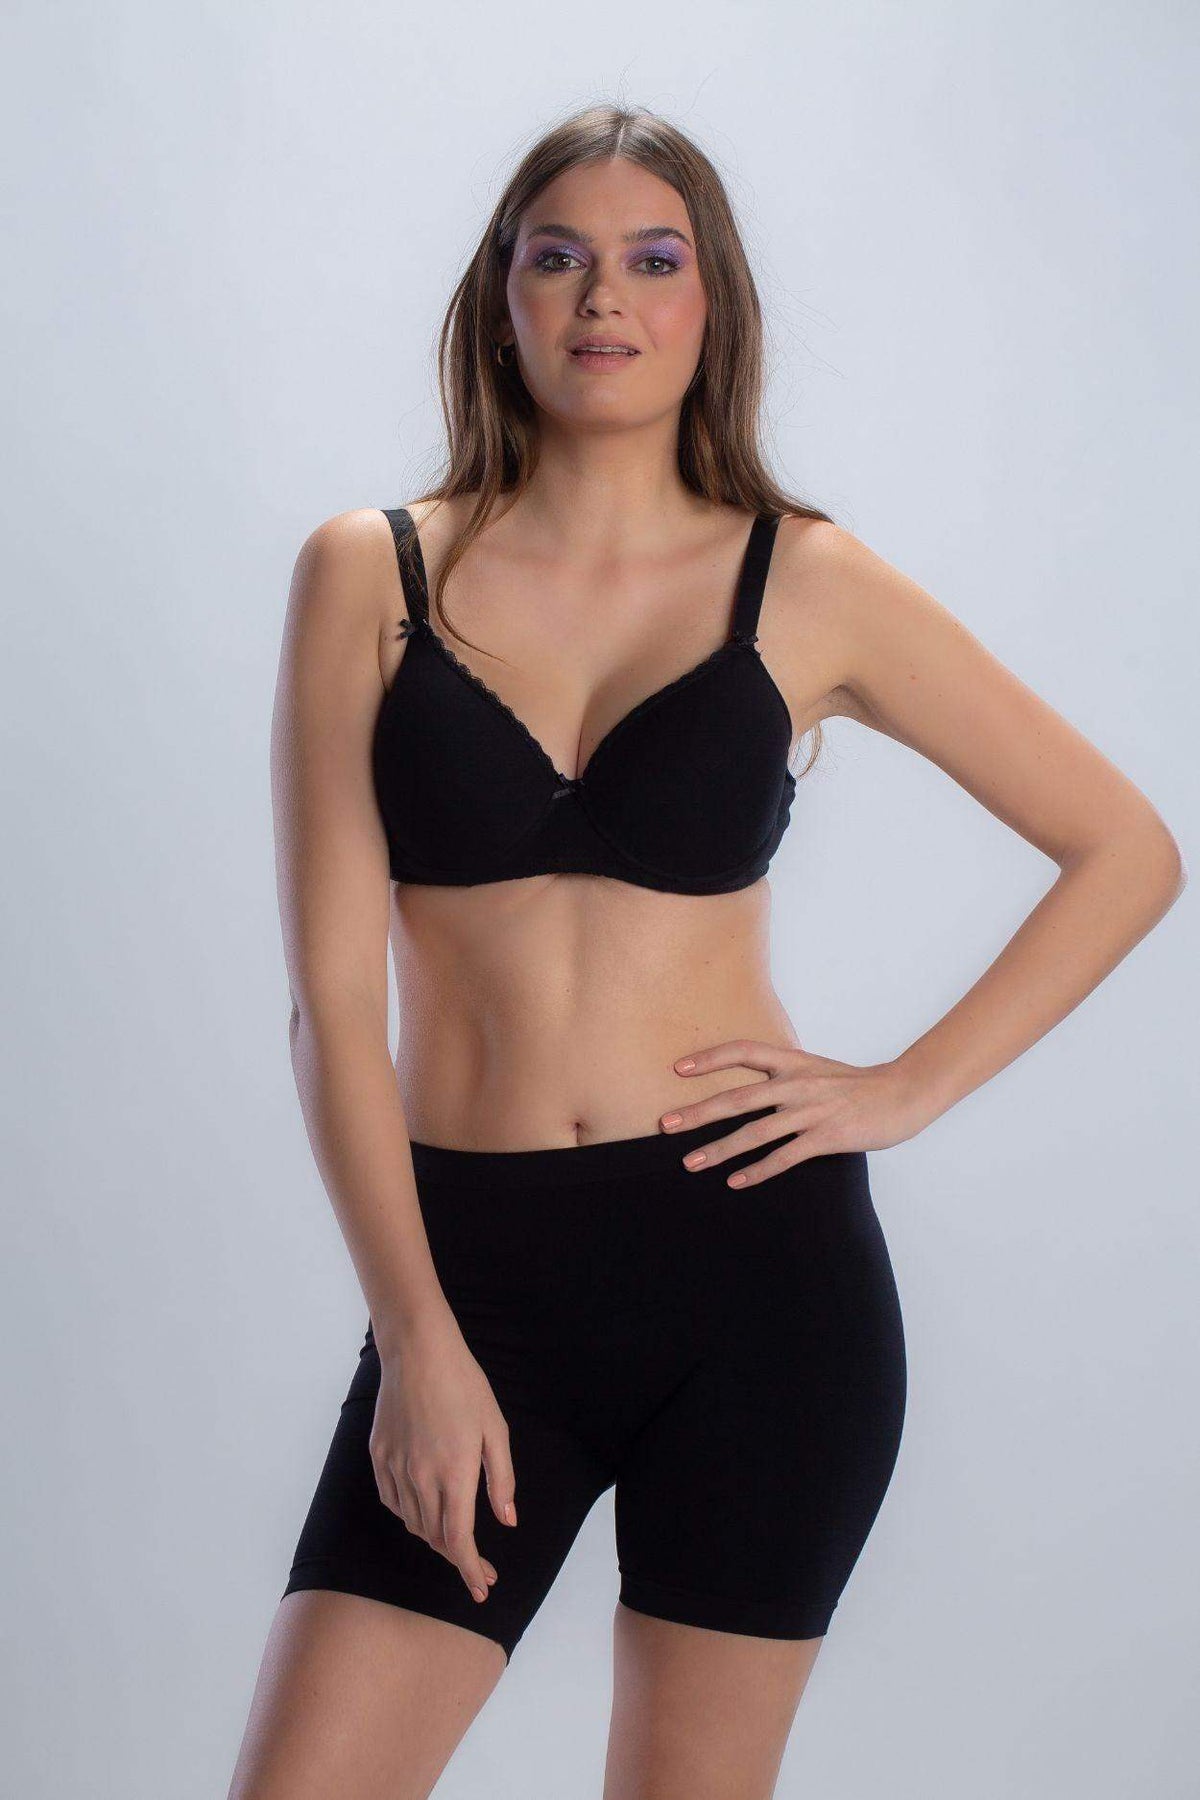 Kayser Rover Cup D Imported Bra (34D) price in Egypt,  Egypt